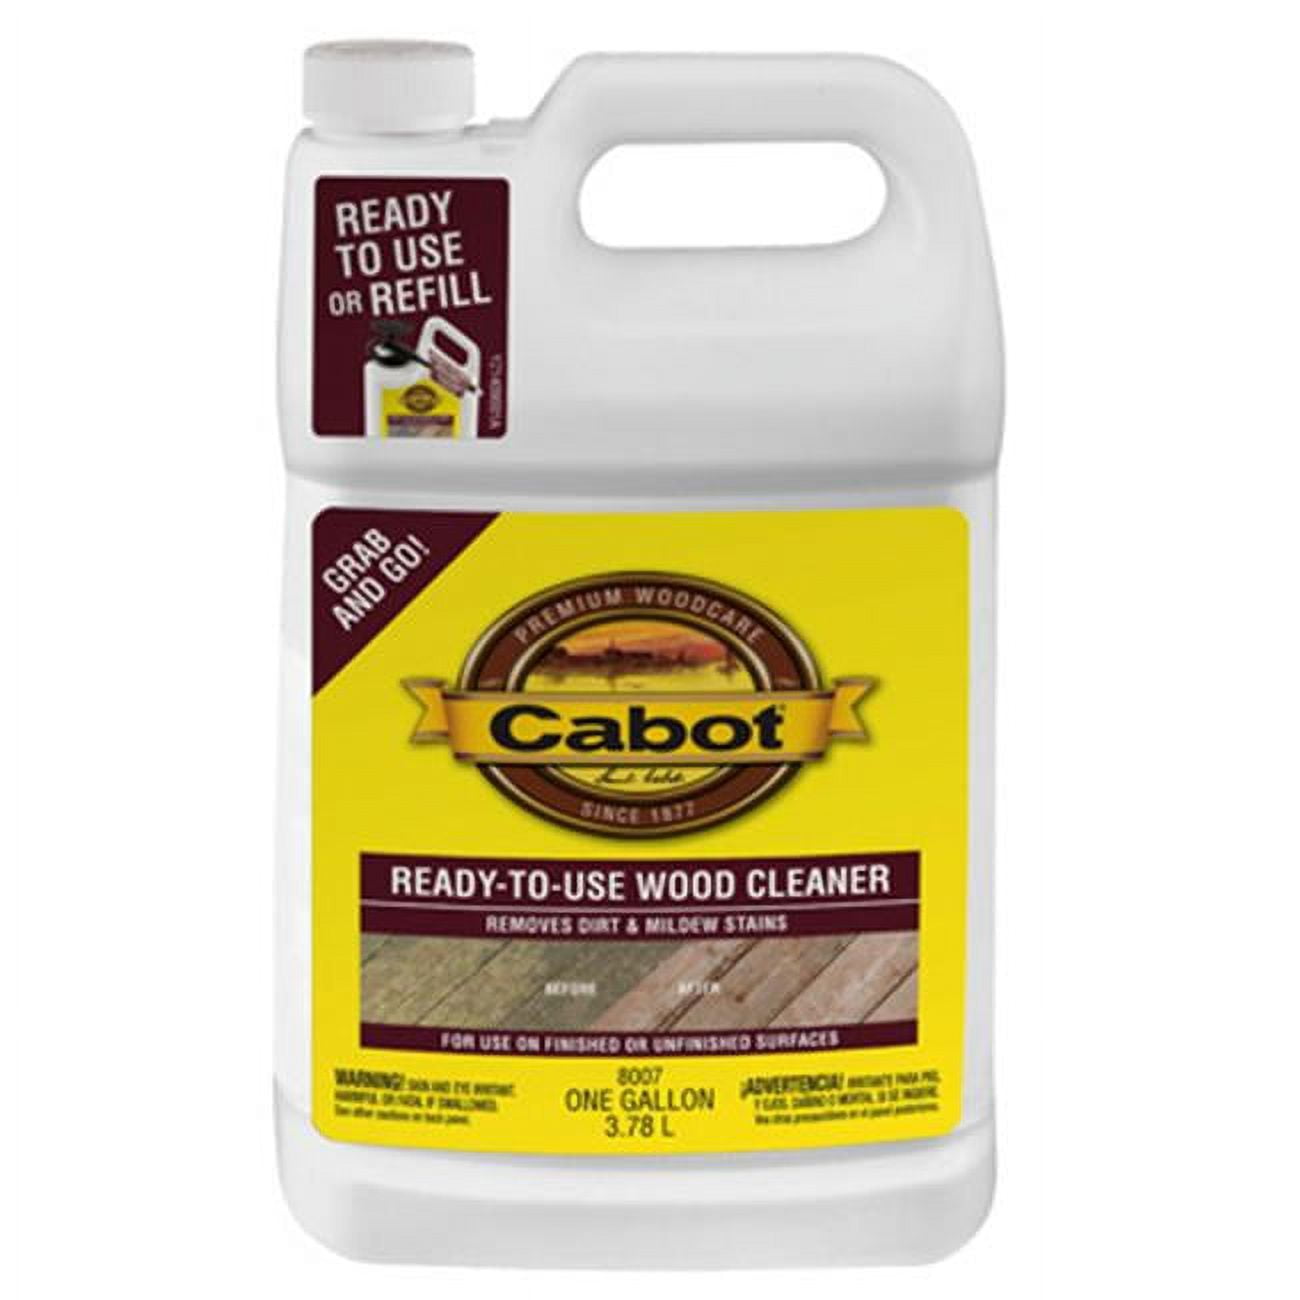 Scott's Liquid Gold Pourable Wood Care Furniture Polish and Cleaner 14 oz  Pack of 6